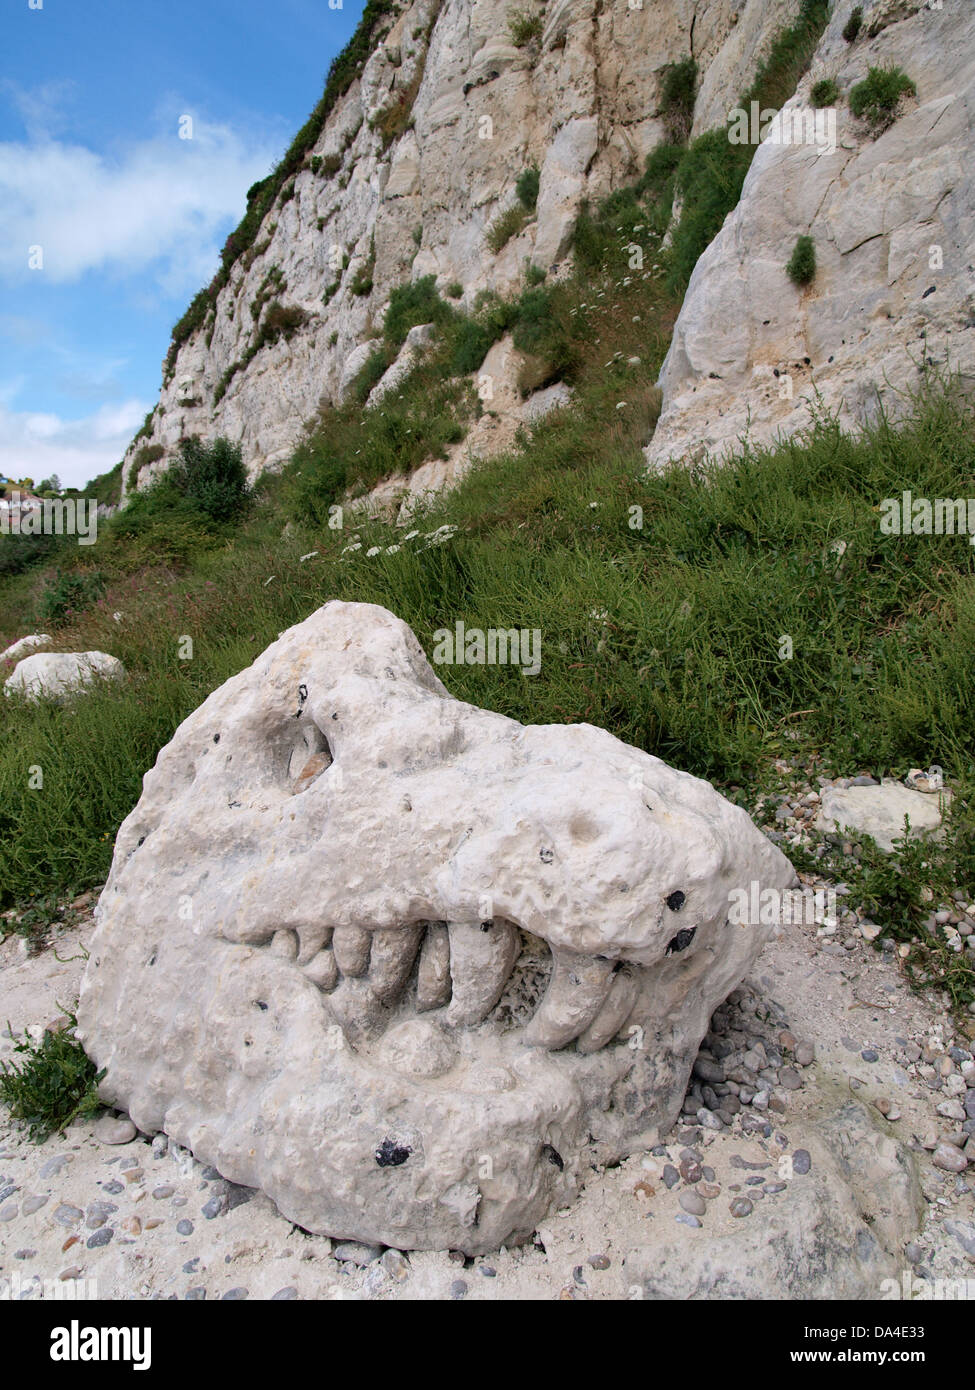 Dinosaur head carved into stone at the bottom of cliffs, Beer, Devon, UK Stock Photo